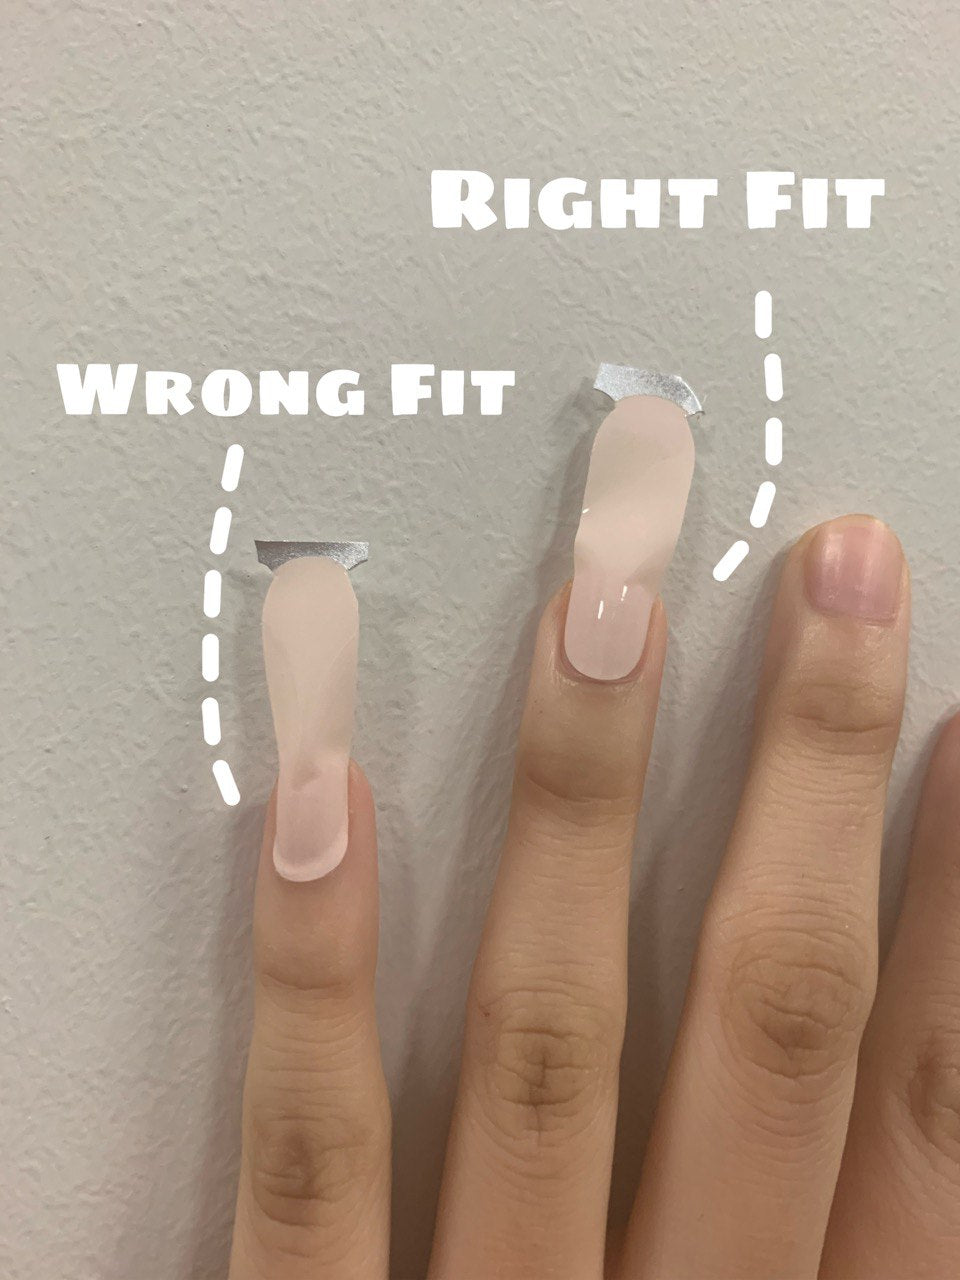 ARE GEL NAIL WRAPS, STICKERS OR STRIPS BAD FOR YOUR NAILS?